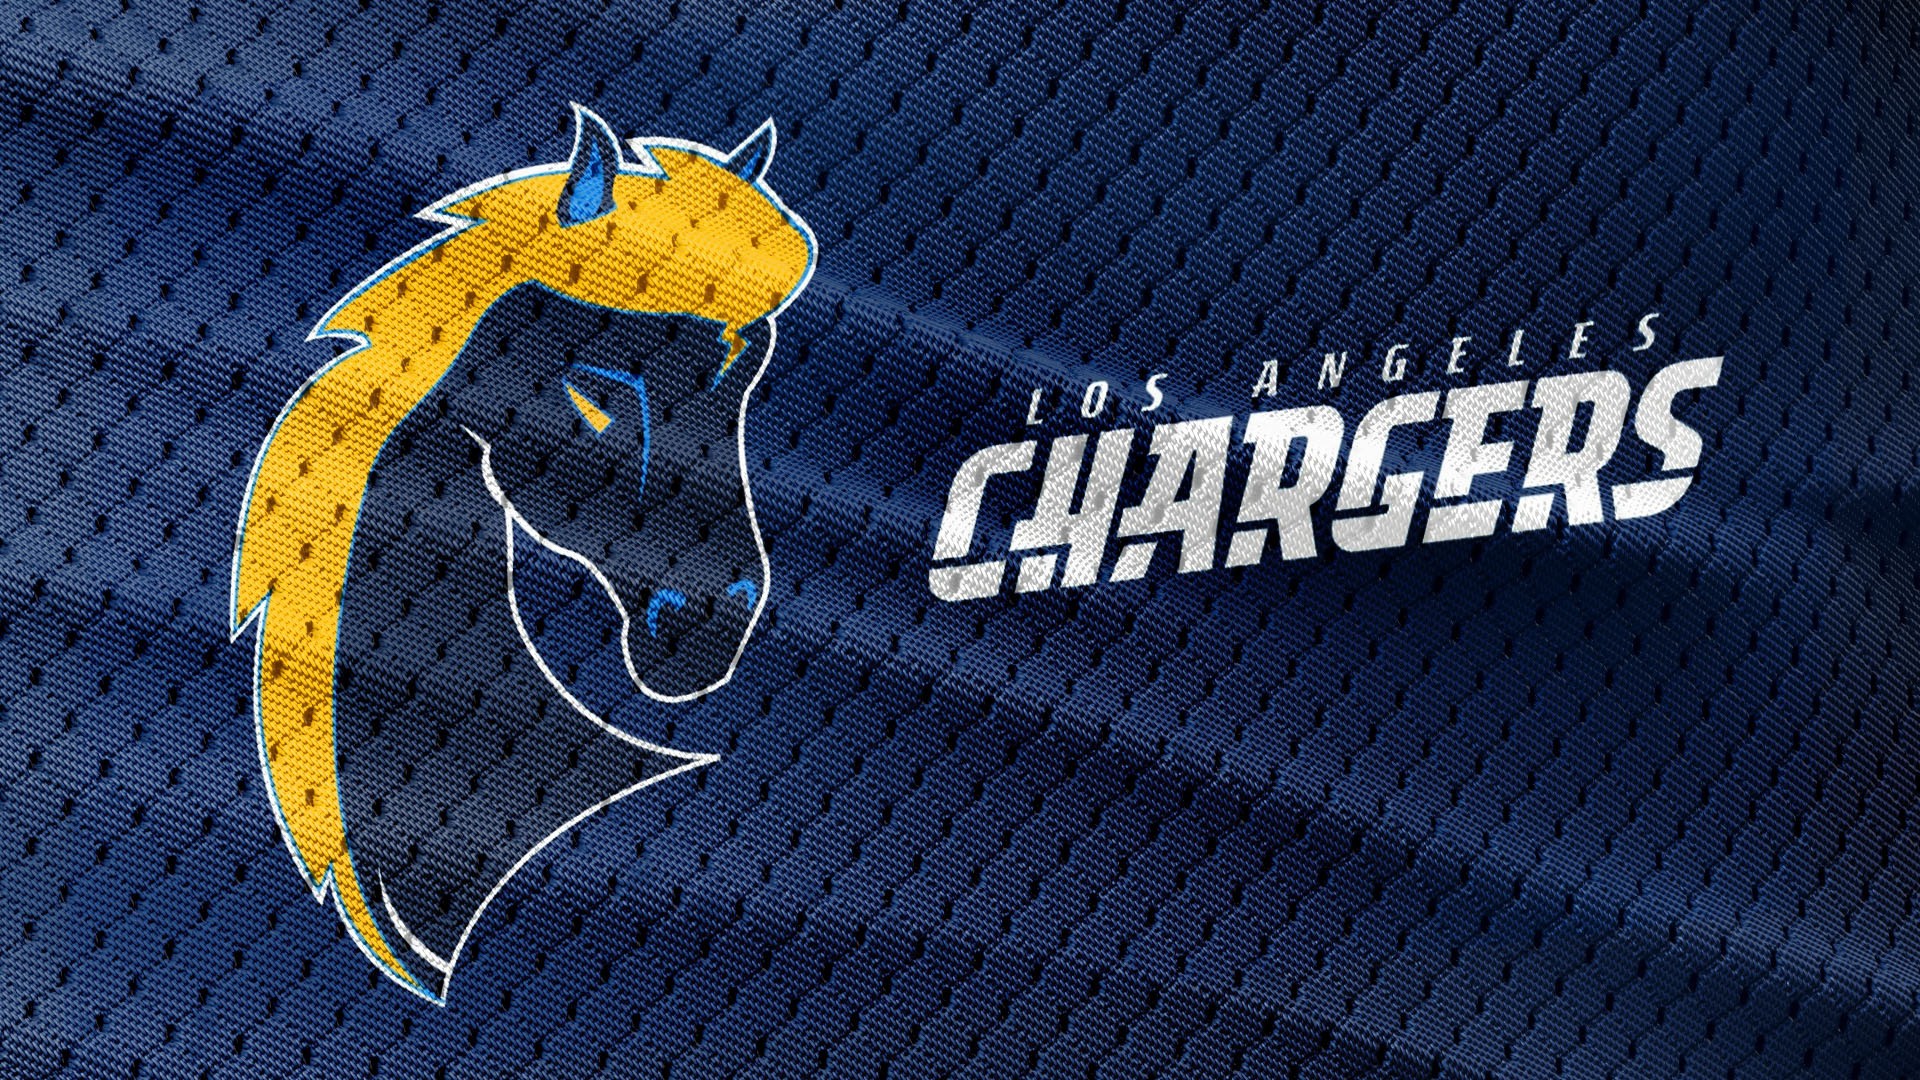 Los Angeles Chargers Mac Backgrounds With Resolution 1920X1080 pixel. You can make this wallpaper for your Mac or Windows Desktop Background, iPhone, Android or Tablet and another Smartphone device for free